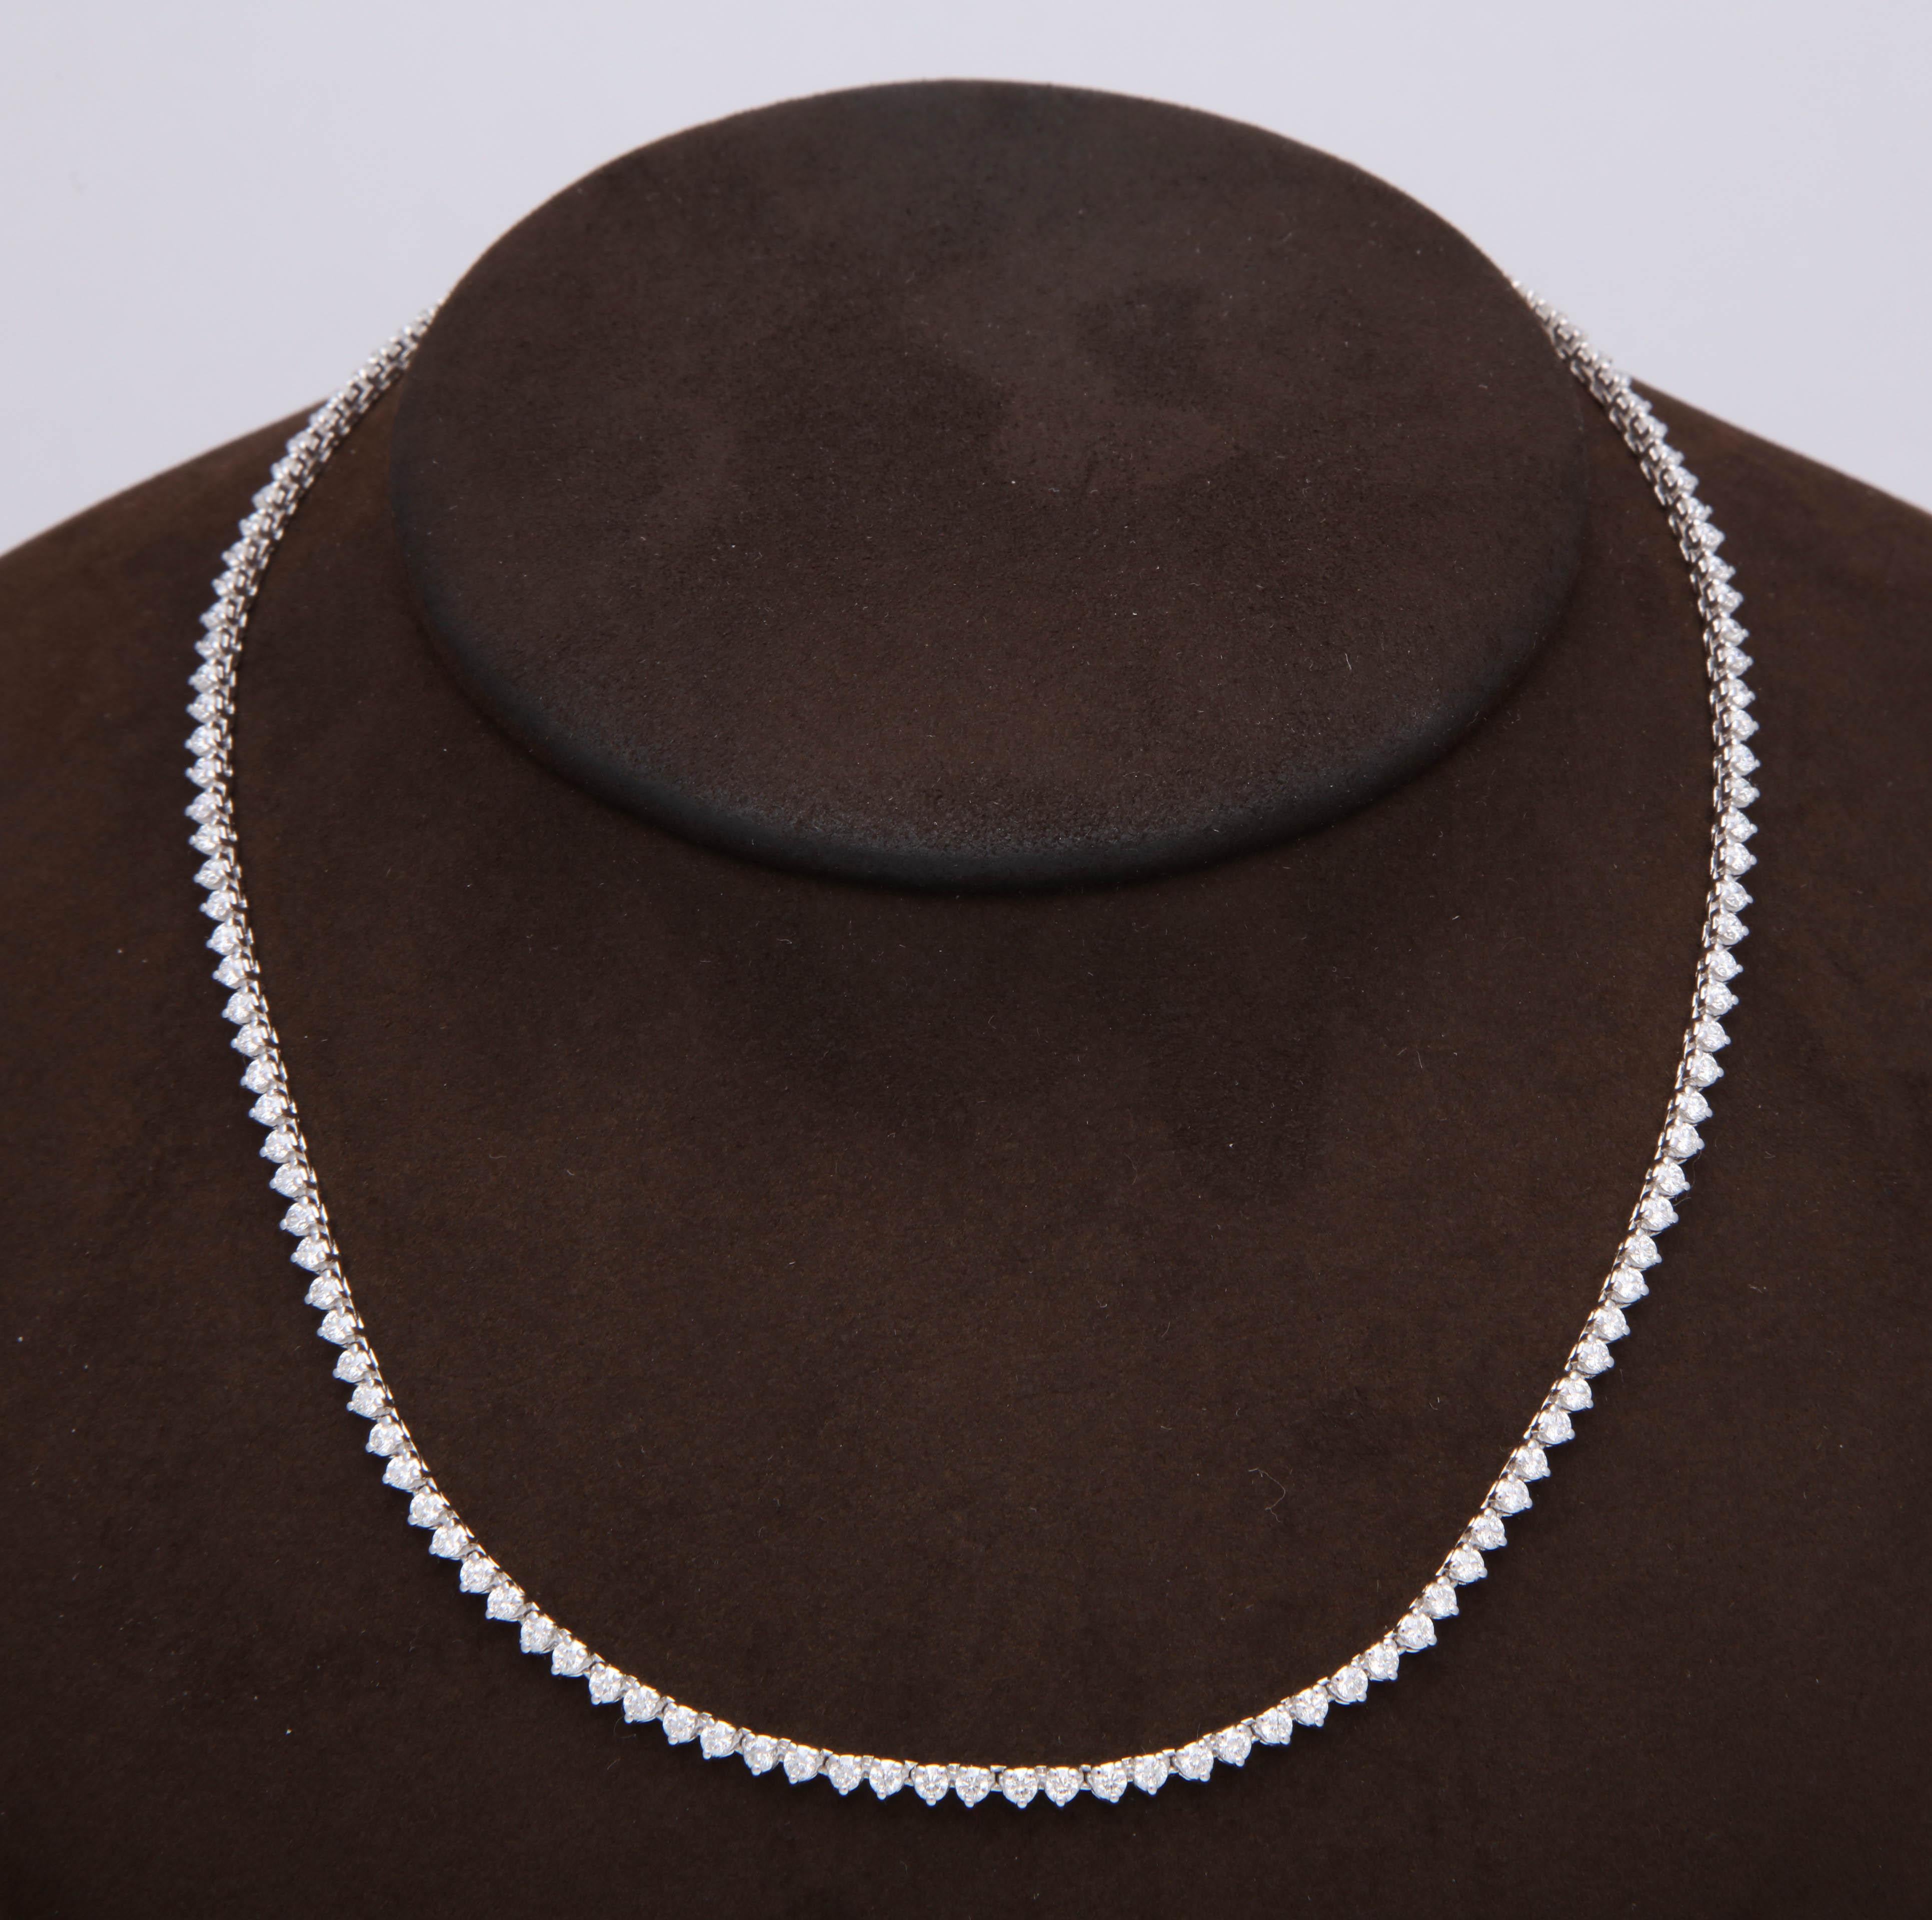 

5.65 carats of white round brilliant cut diamonds set in 14k white gold

A perfect choker necklace that can be worn daily and casually or dressed up. 

Looks great layered with other pieces as well!

16 inch length, can be ordered longer or